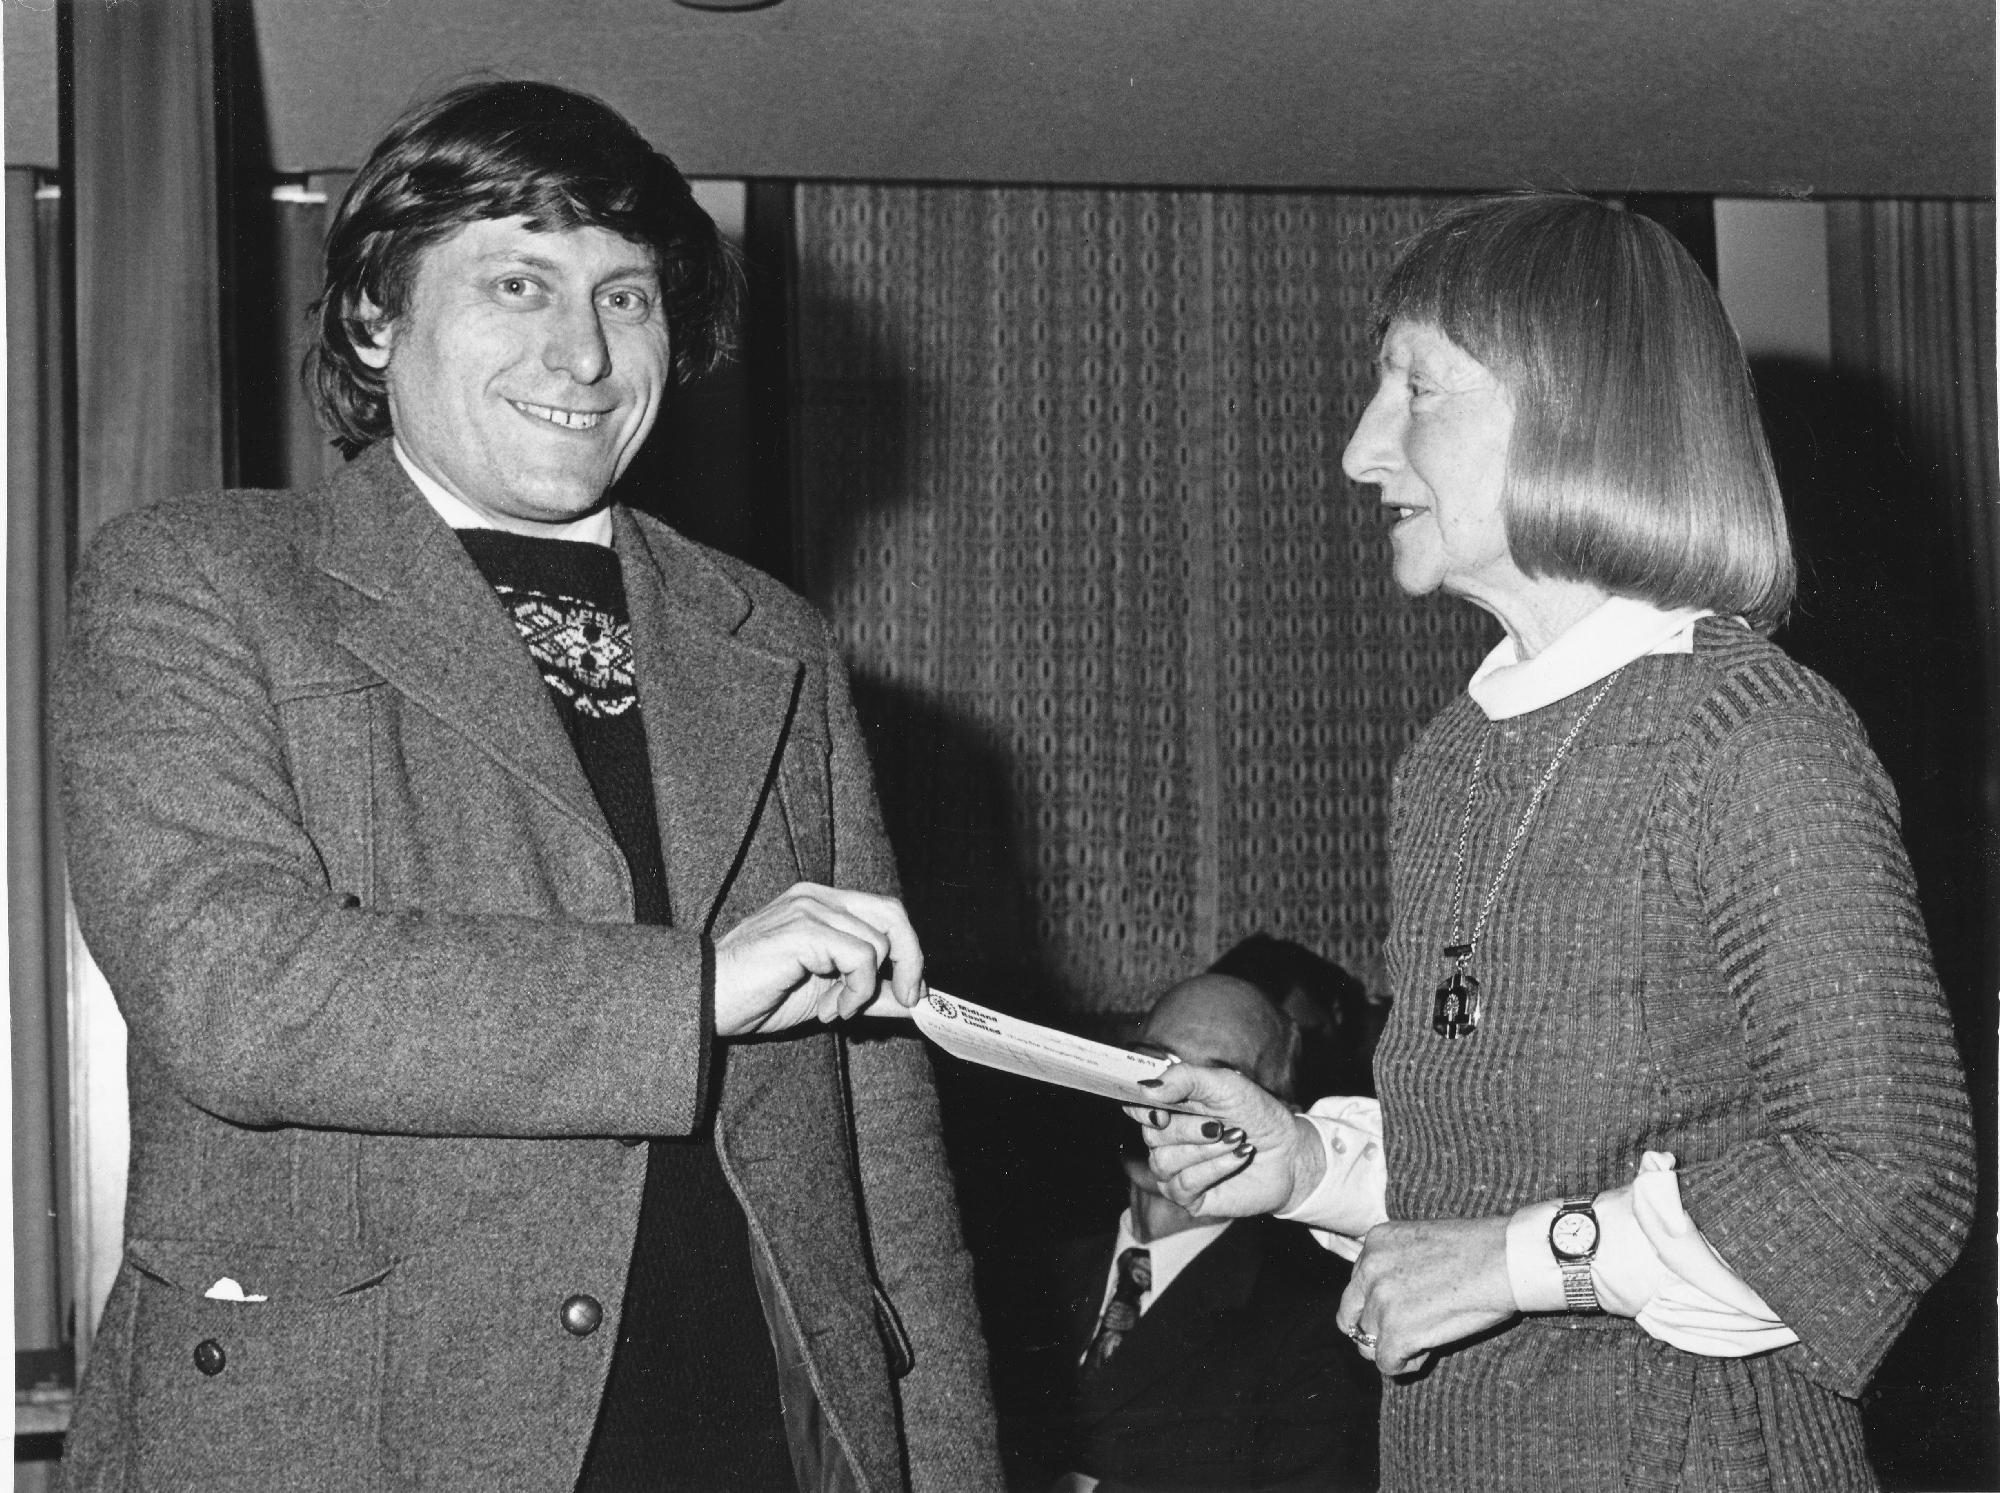 Dave Rumens is pleased to accept a cheque for £200 from Lady Thelma Milner-Barry for winning the 1978 Nottingham Congress with 5.5/6. Photograph provided by Nottinghamshire County Council.